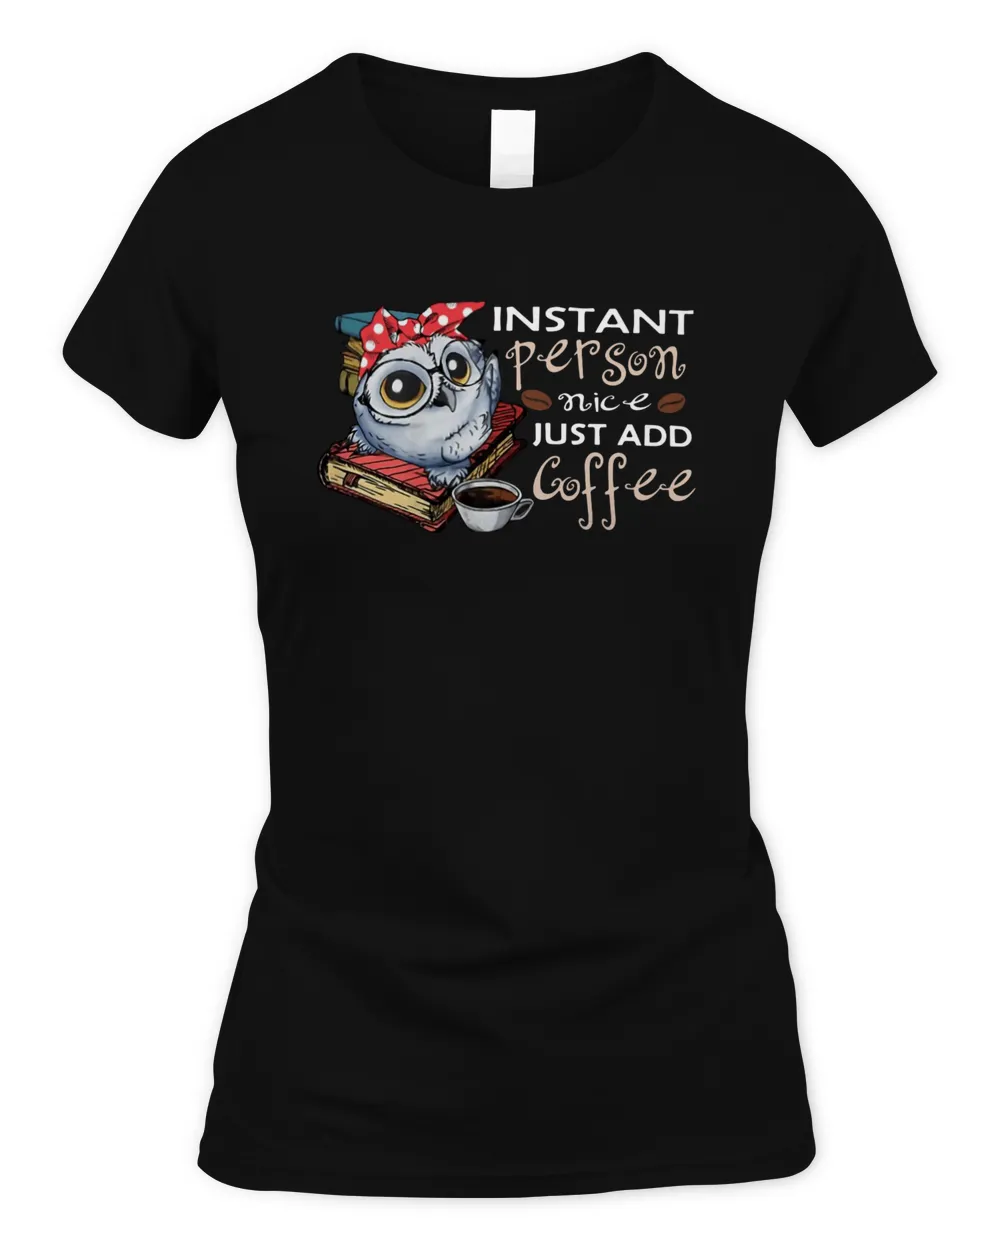 Owl Instant Person Nice Just Add Coffee Shirt